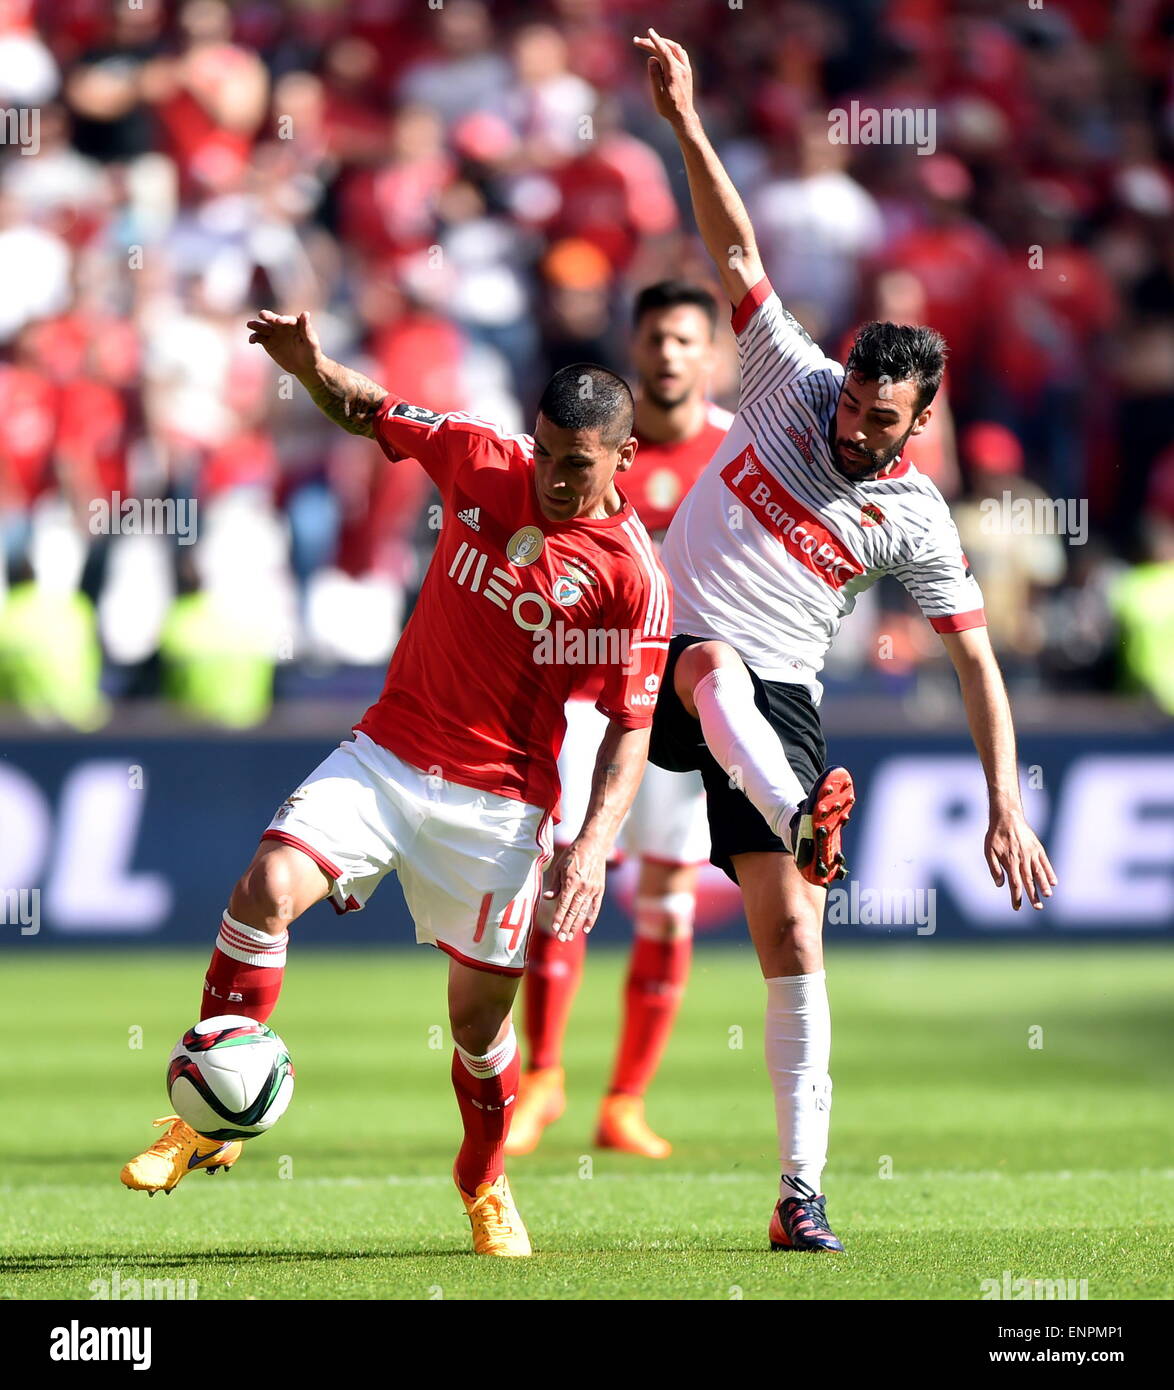 Lisbon, Portugal. 9th May, 2015. Maxi Pereira (L) of Benfica vies with Andres Fontes of Penafiel during a match at the 2014/15 season Portuguese league in Lisbon, Portugal, on May 9, 2015. Benfica won 4-0. Credit:  Zhang Liyun/Xinhua/Alamy Live News Stock Photo